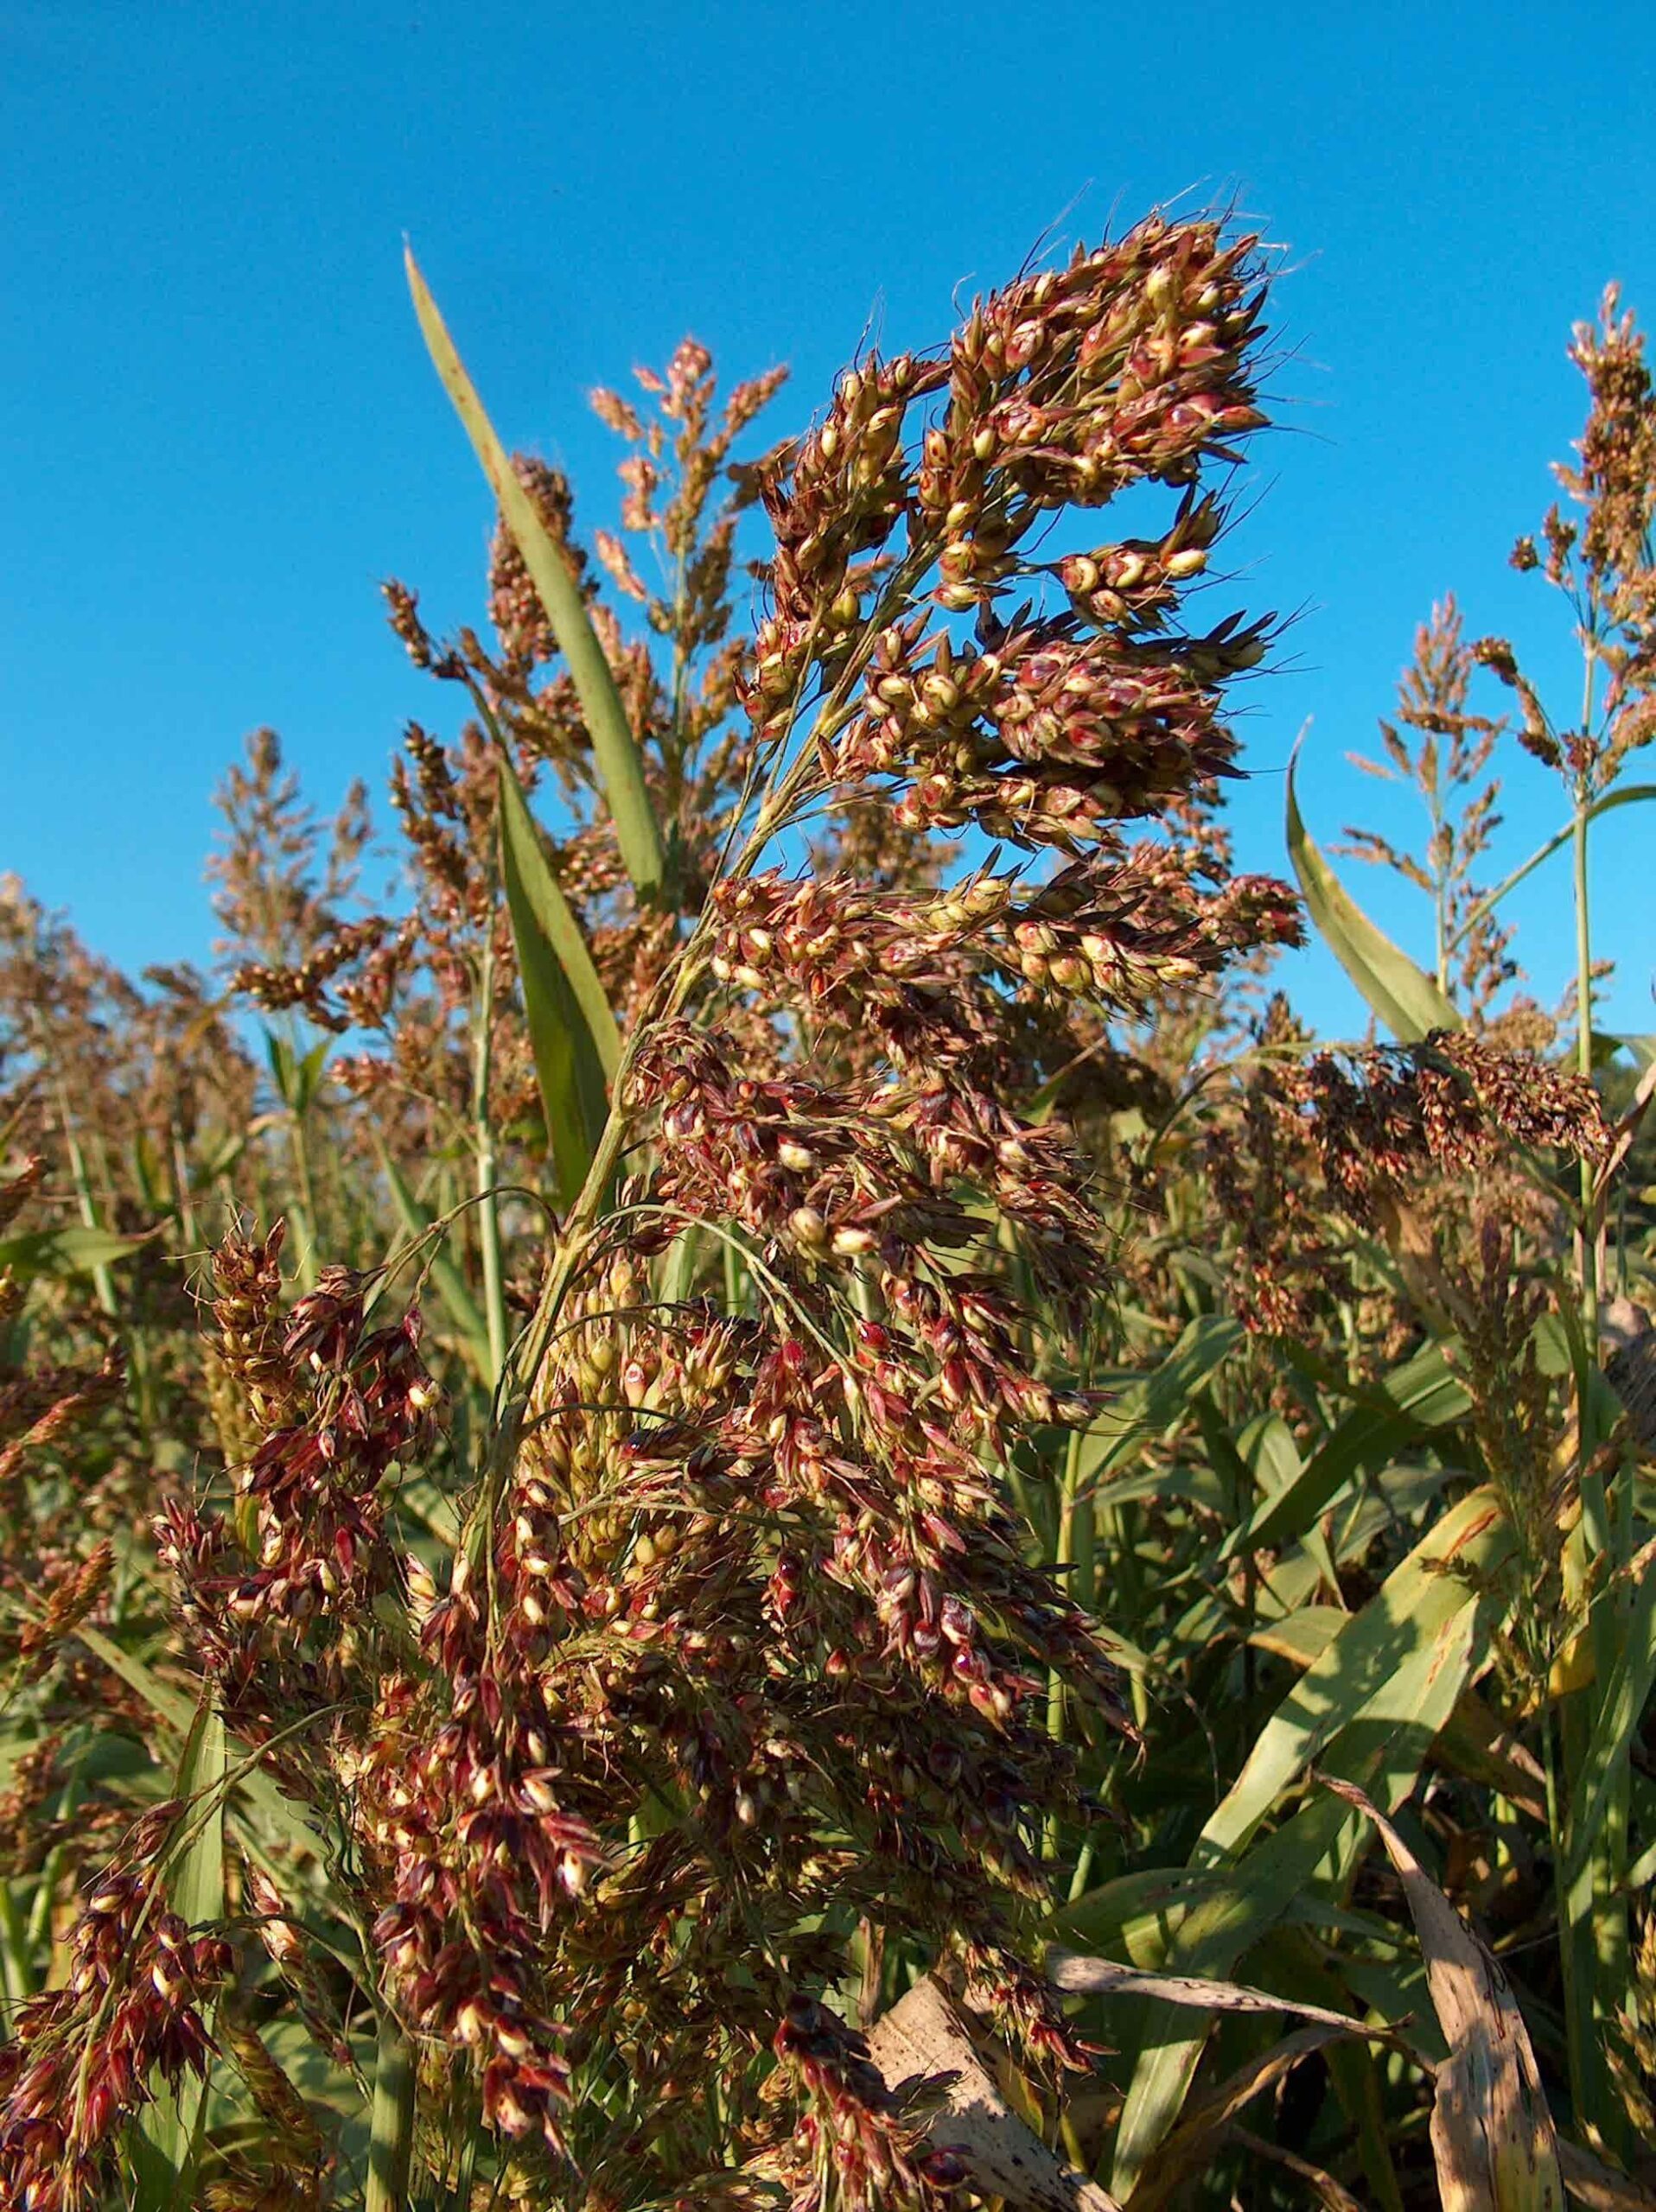 Photograph showing a close-up of an inflorescence of sudangrass with reddish spikelets.